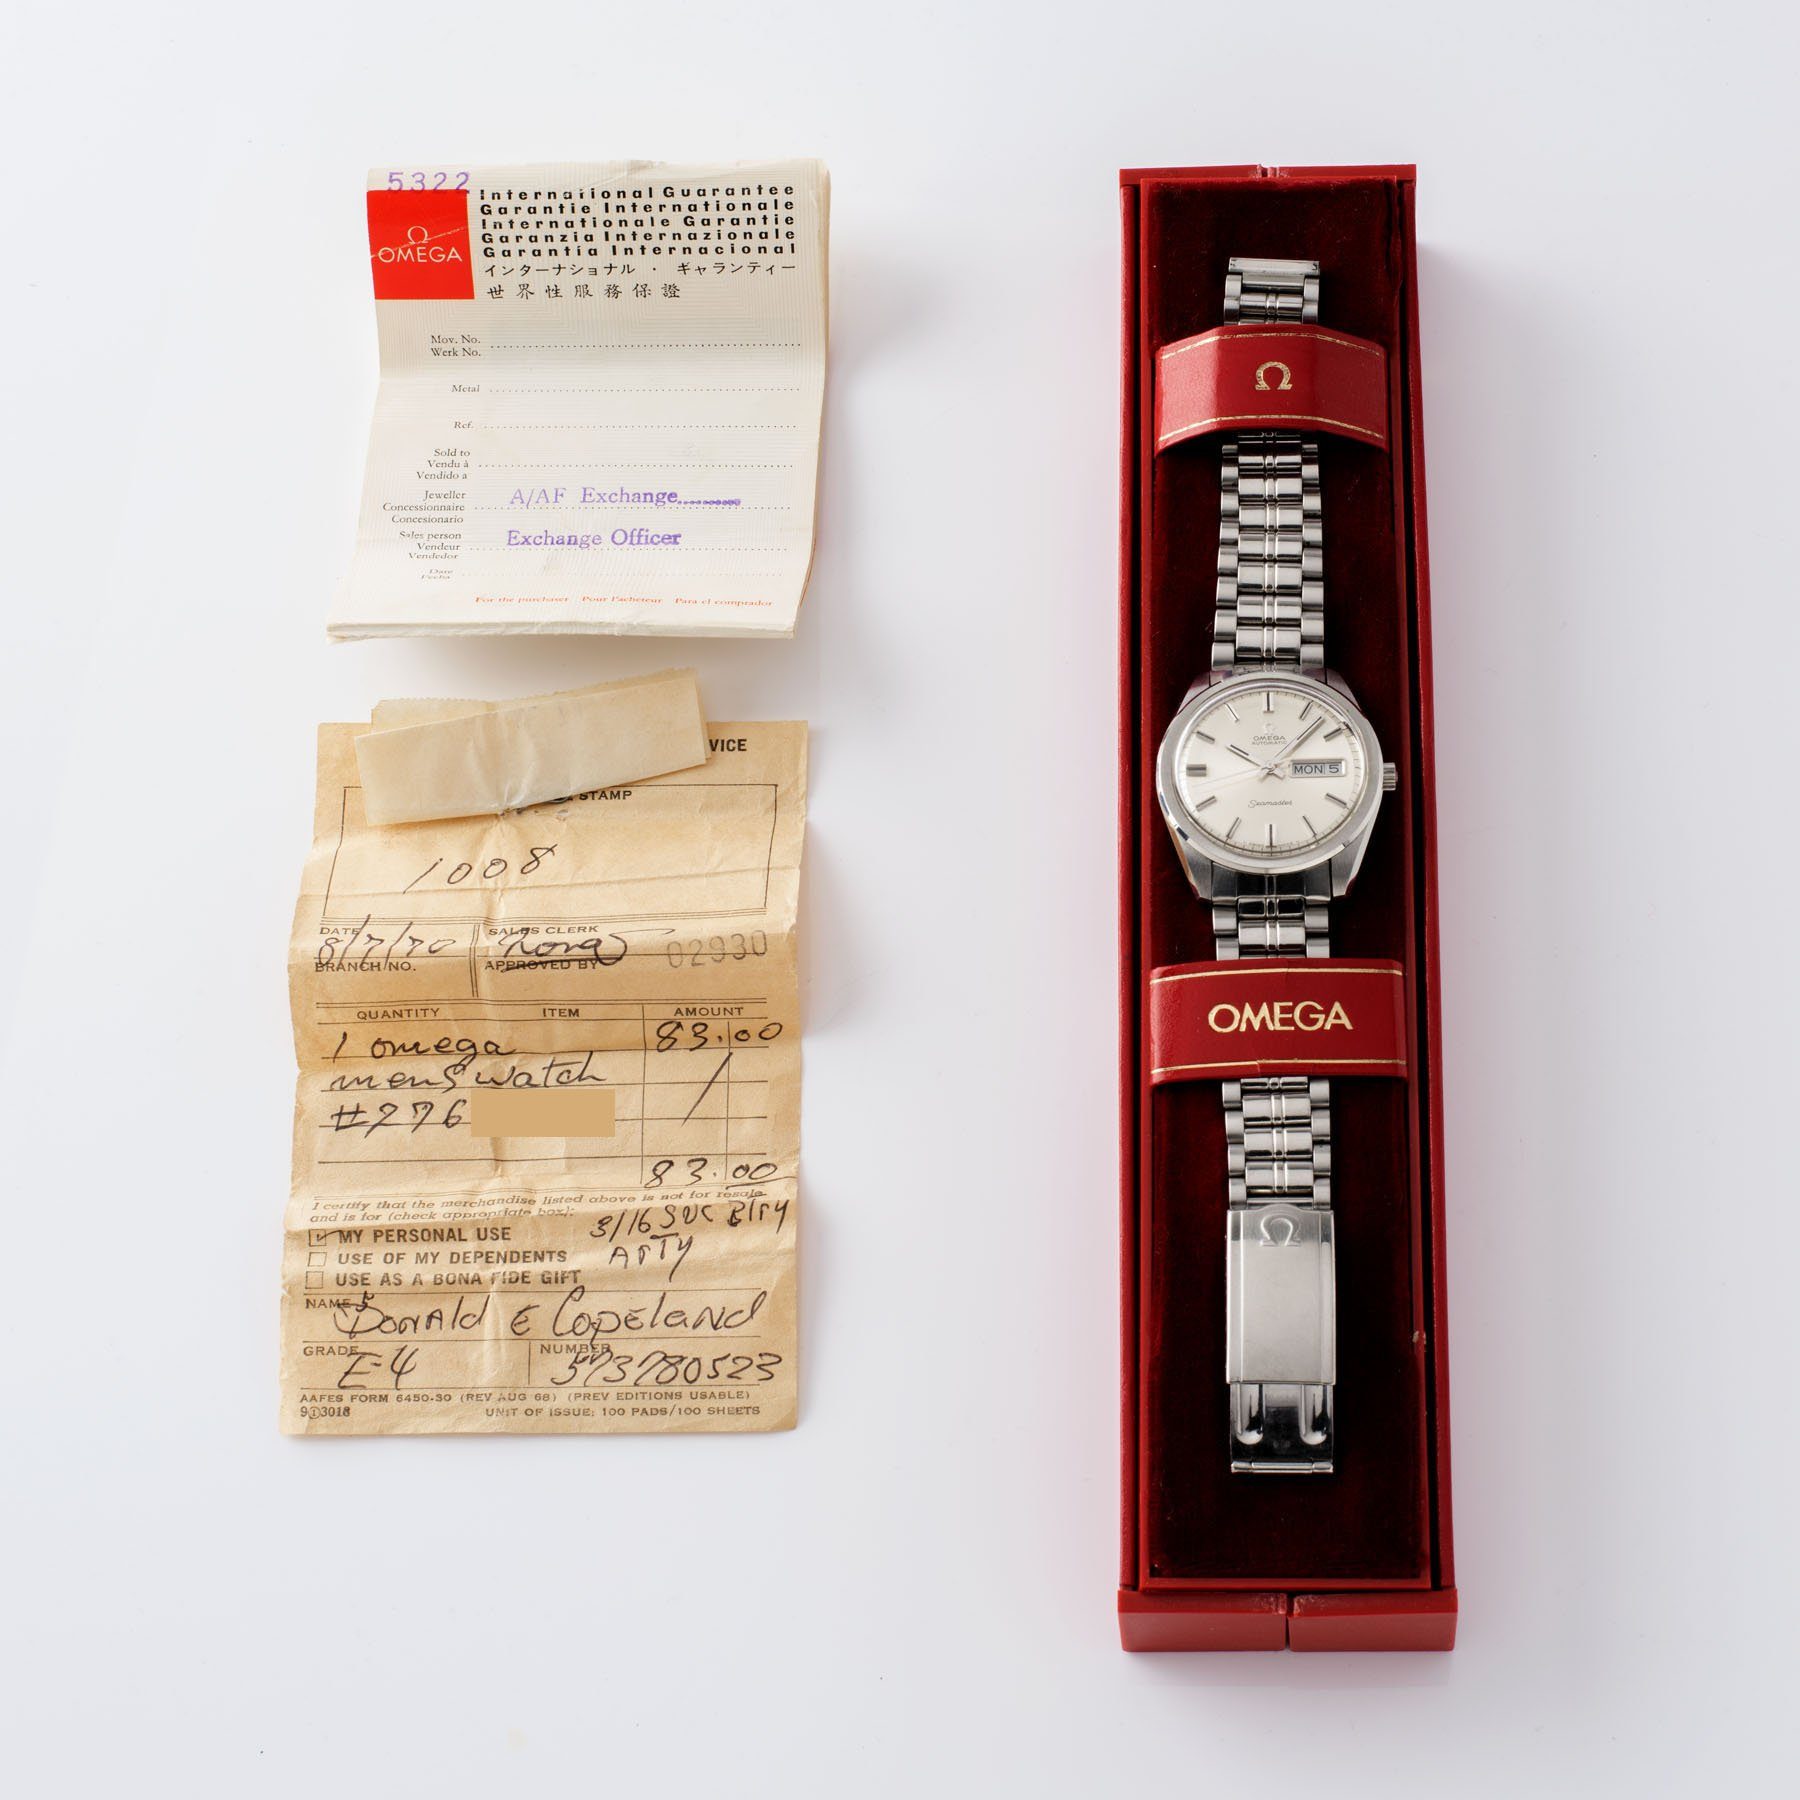 Omega Seamaster Dress Watch Ref 166 032 with Box and papers with military provenance